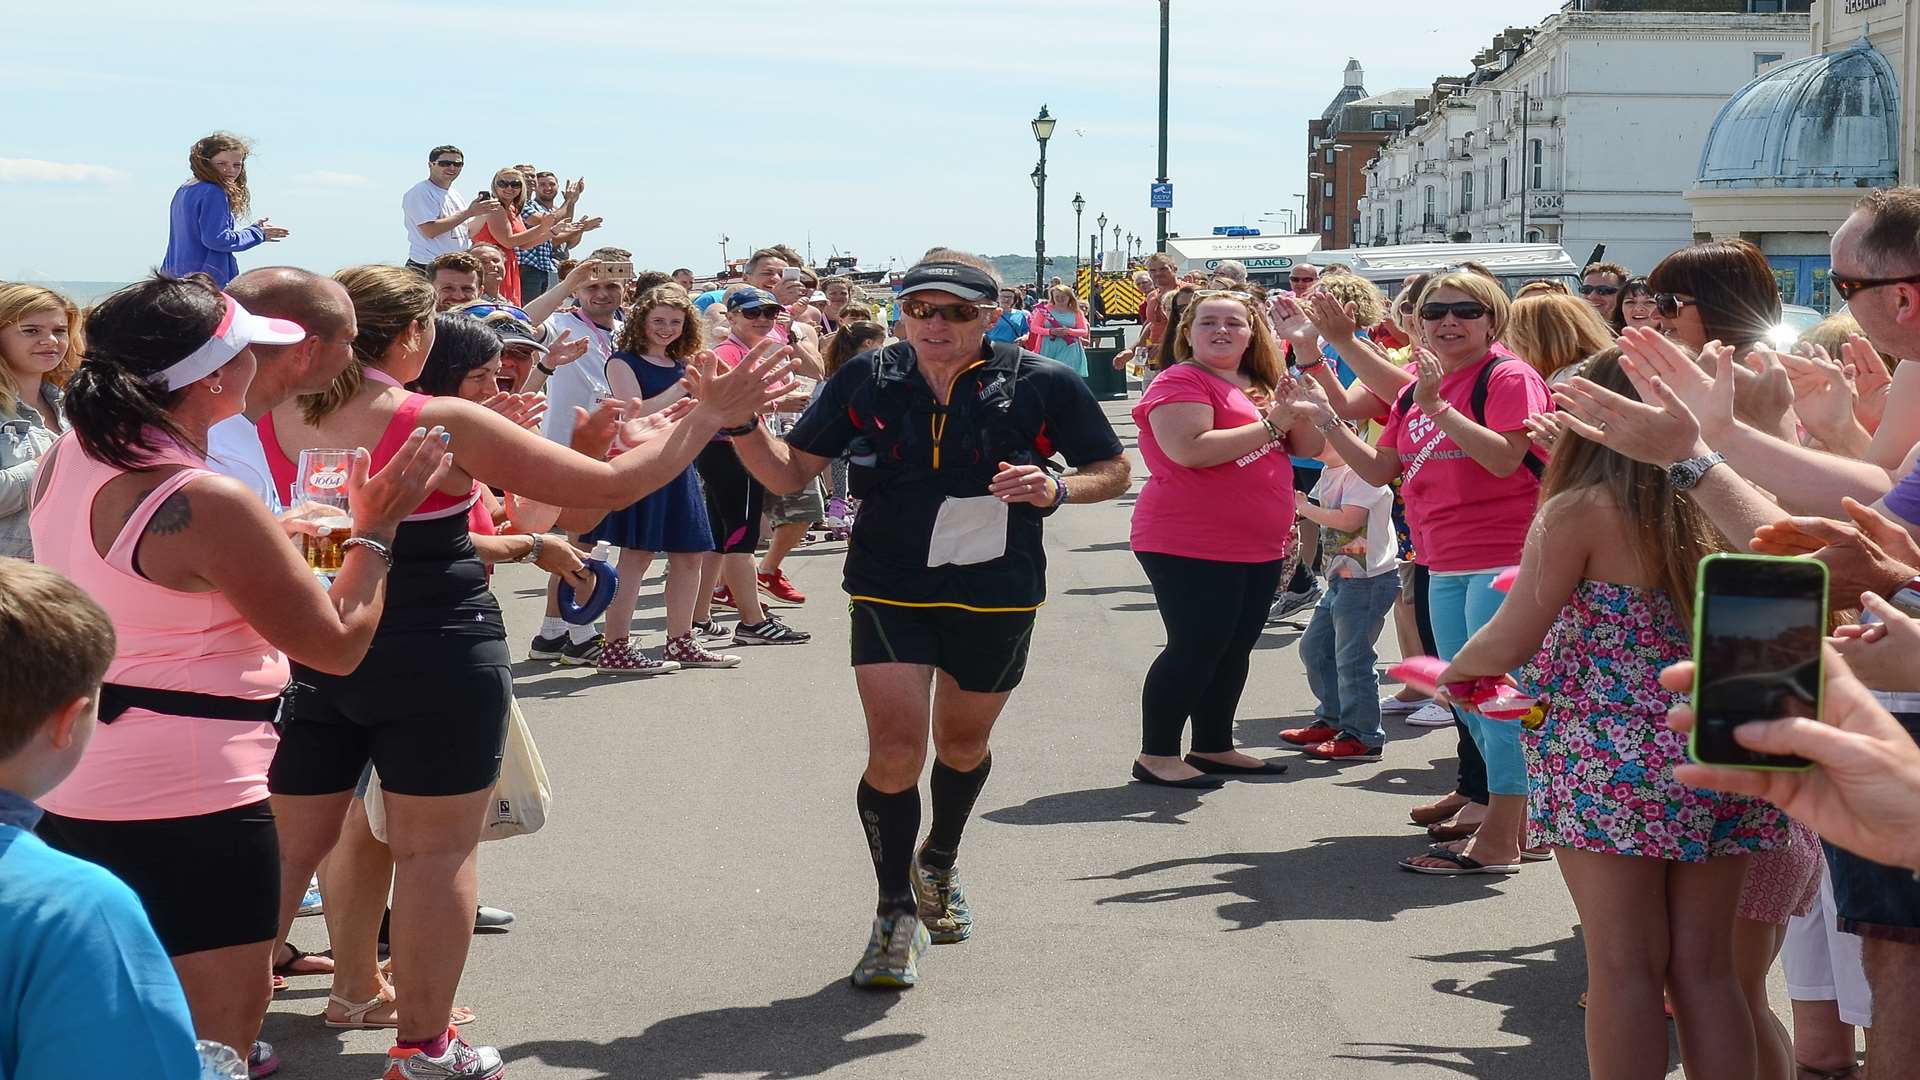 Phil Rashbrook was the first of the 55 mile runners to cross the finish line last year